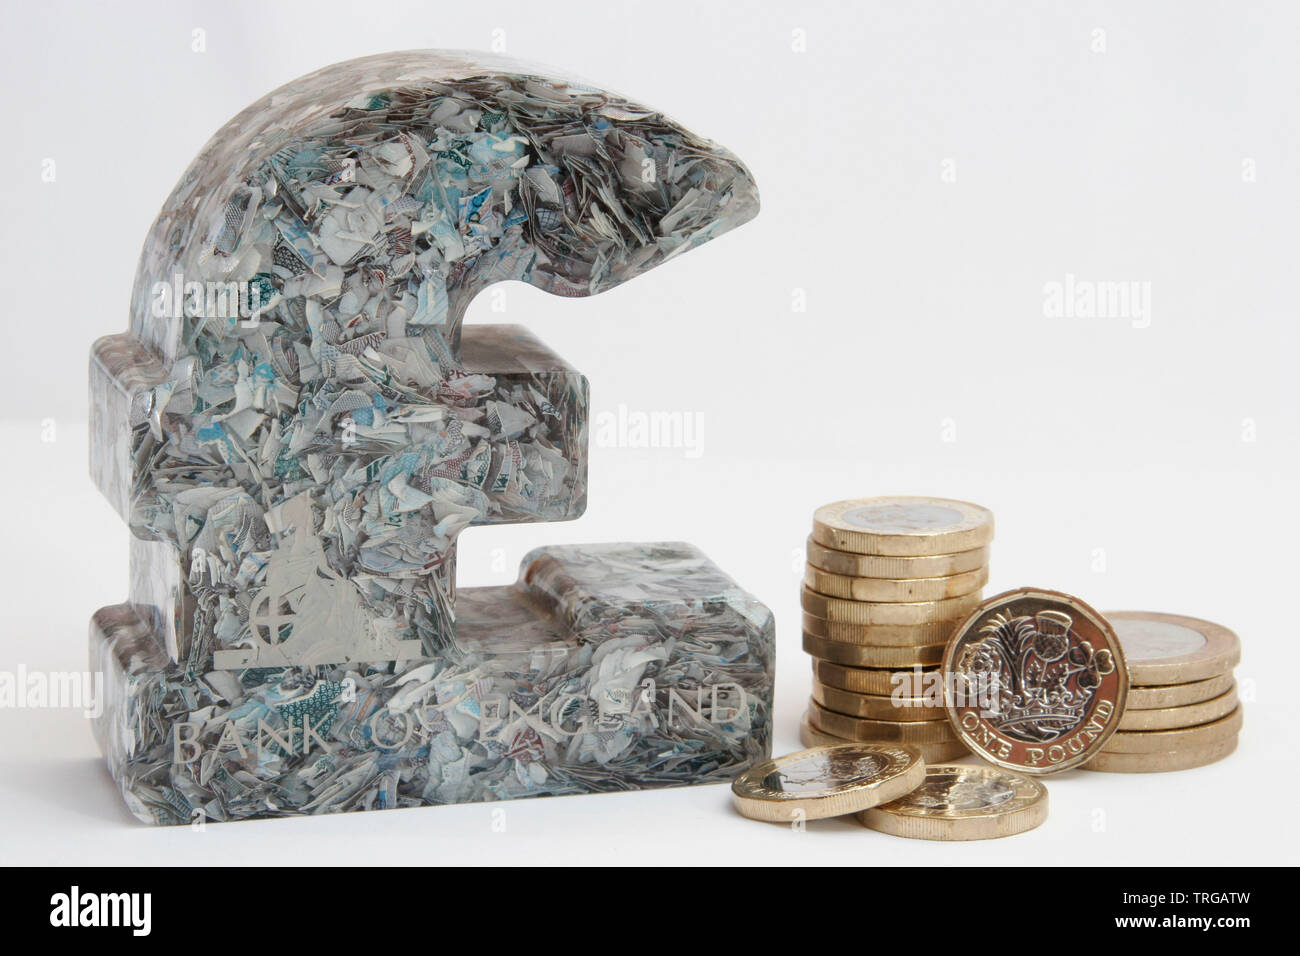 British Pound paper weight made from chopped up £5 notes next to £1 coins and notes UK Stock Photo